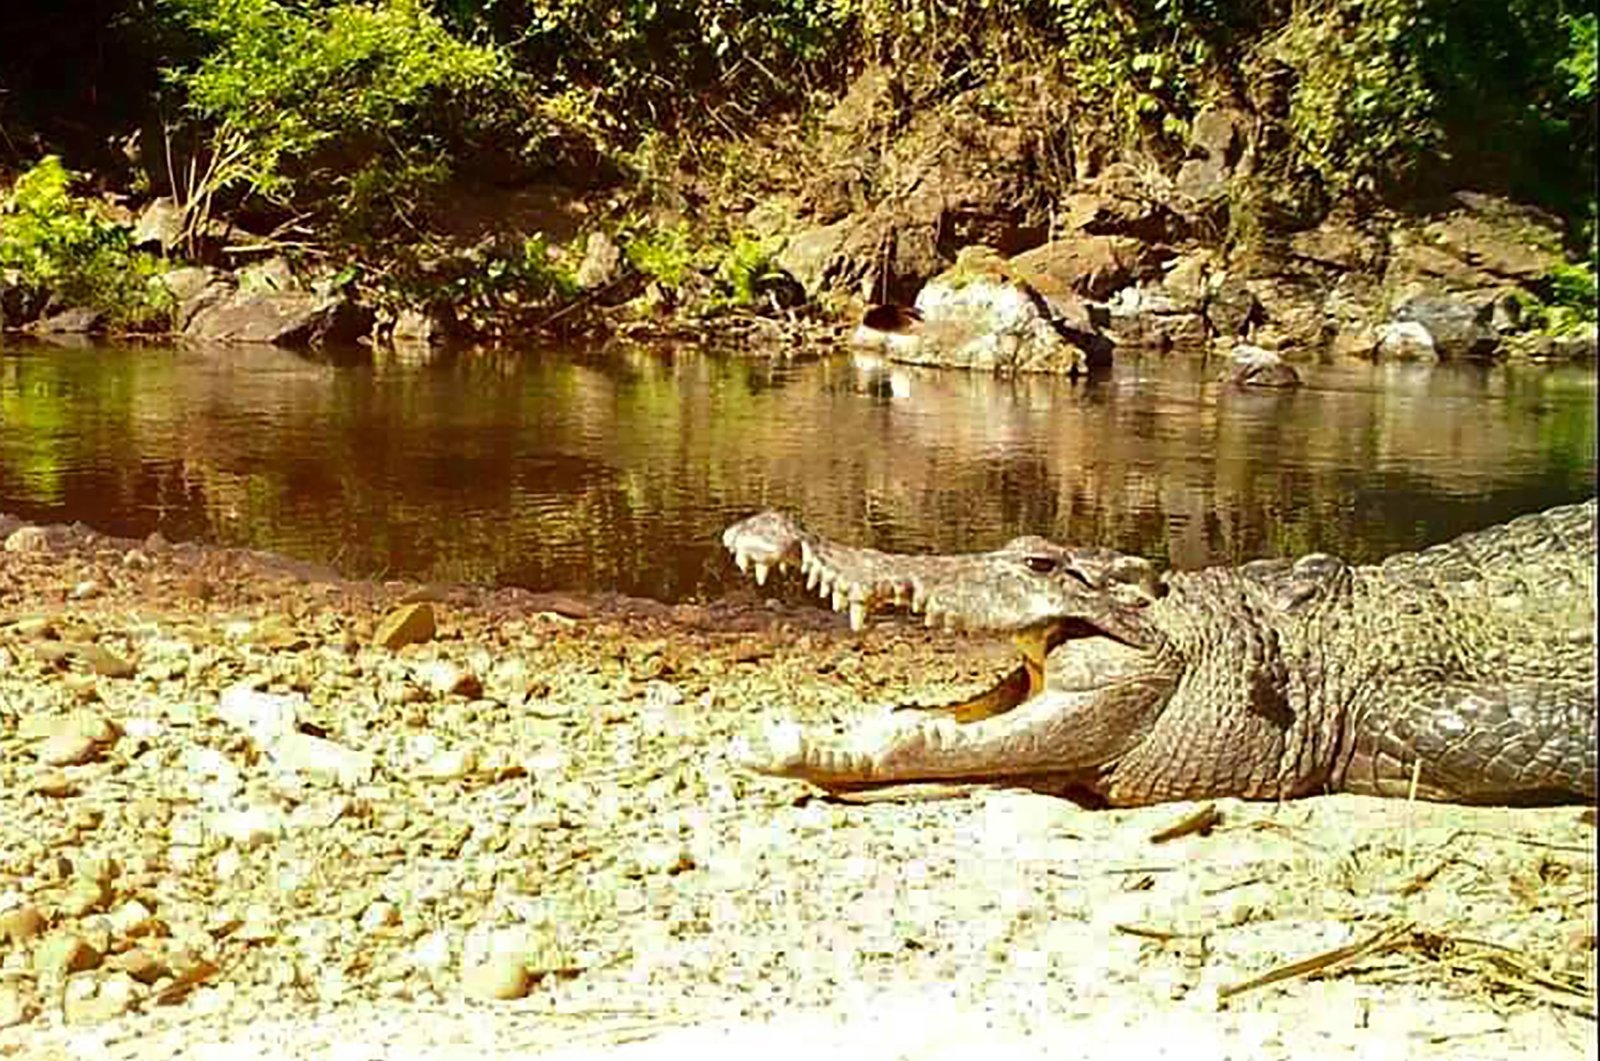 This camera trap photo shows a freshwater Siamese crocodile by Kaeng Krachan National Park, Thailand on Jan. 23, 2021. (AFP Photo)